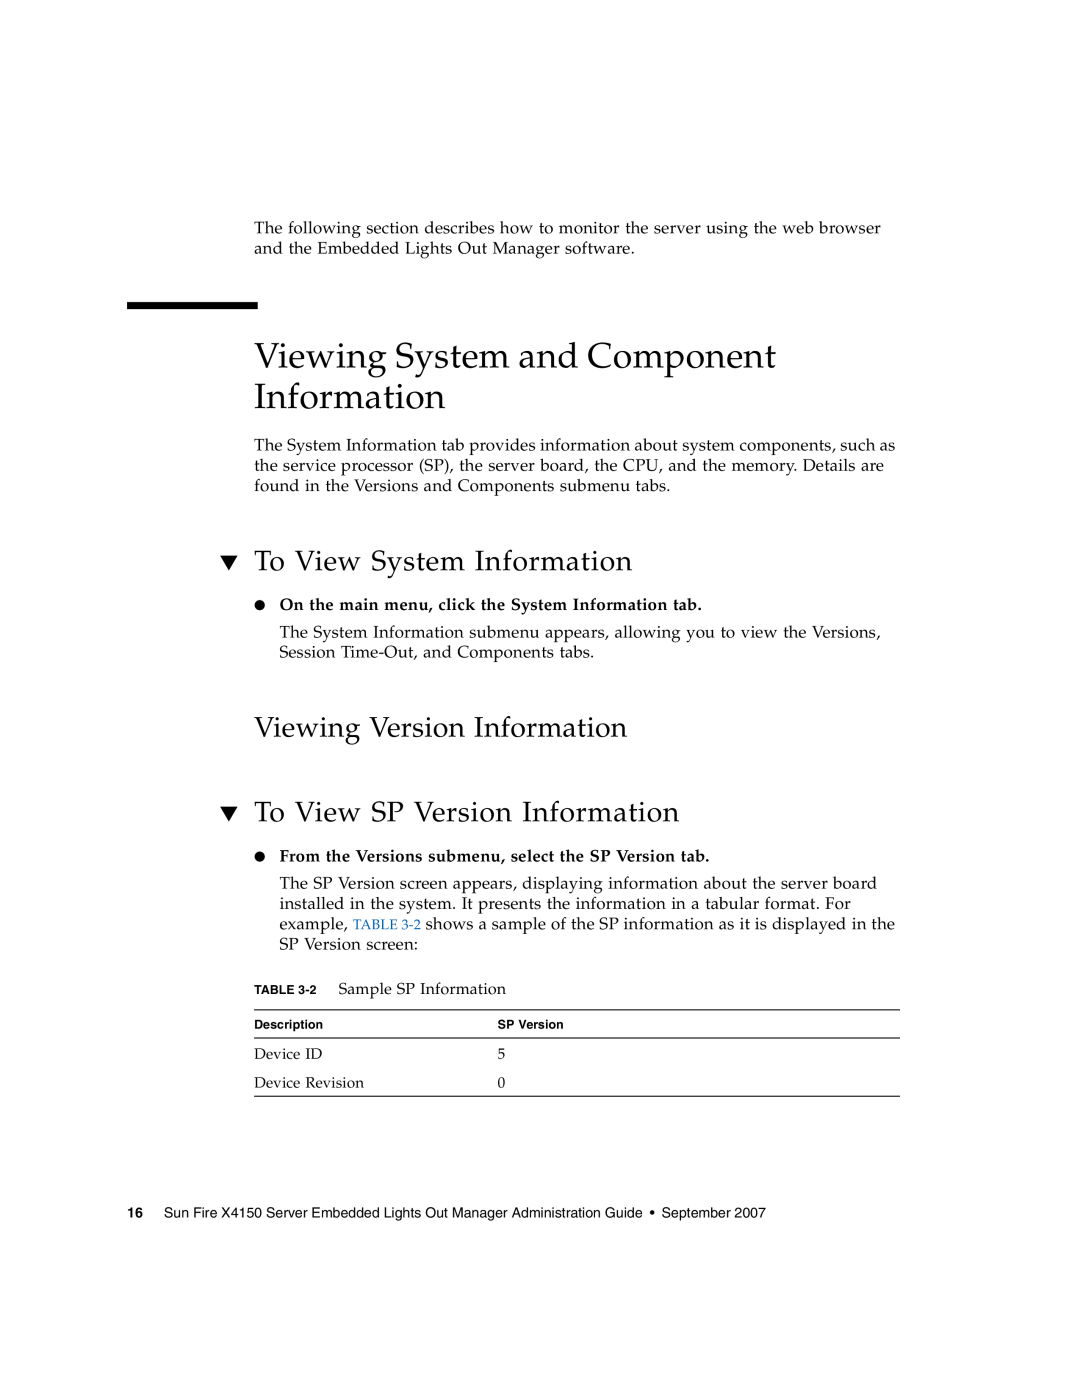 Sun Microsystems X4150 manual Viewing System and Component Information, To View System Information 